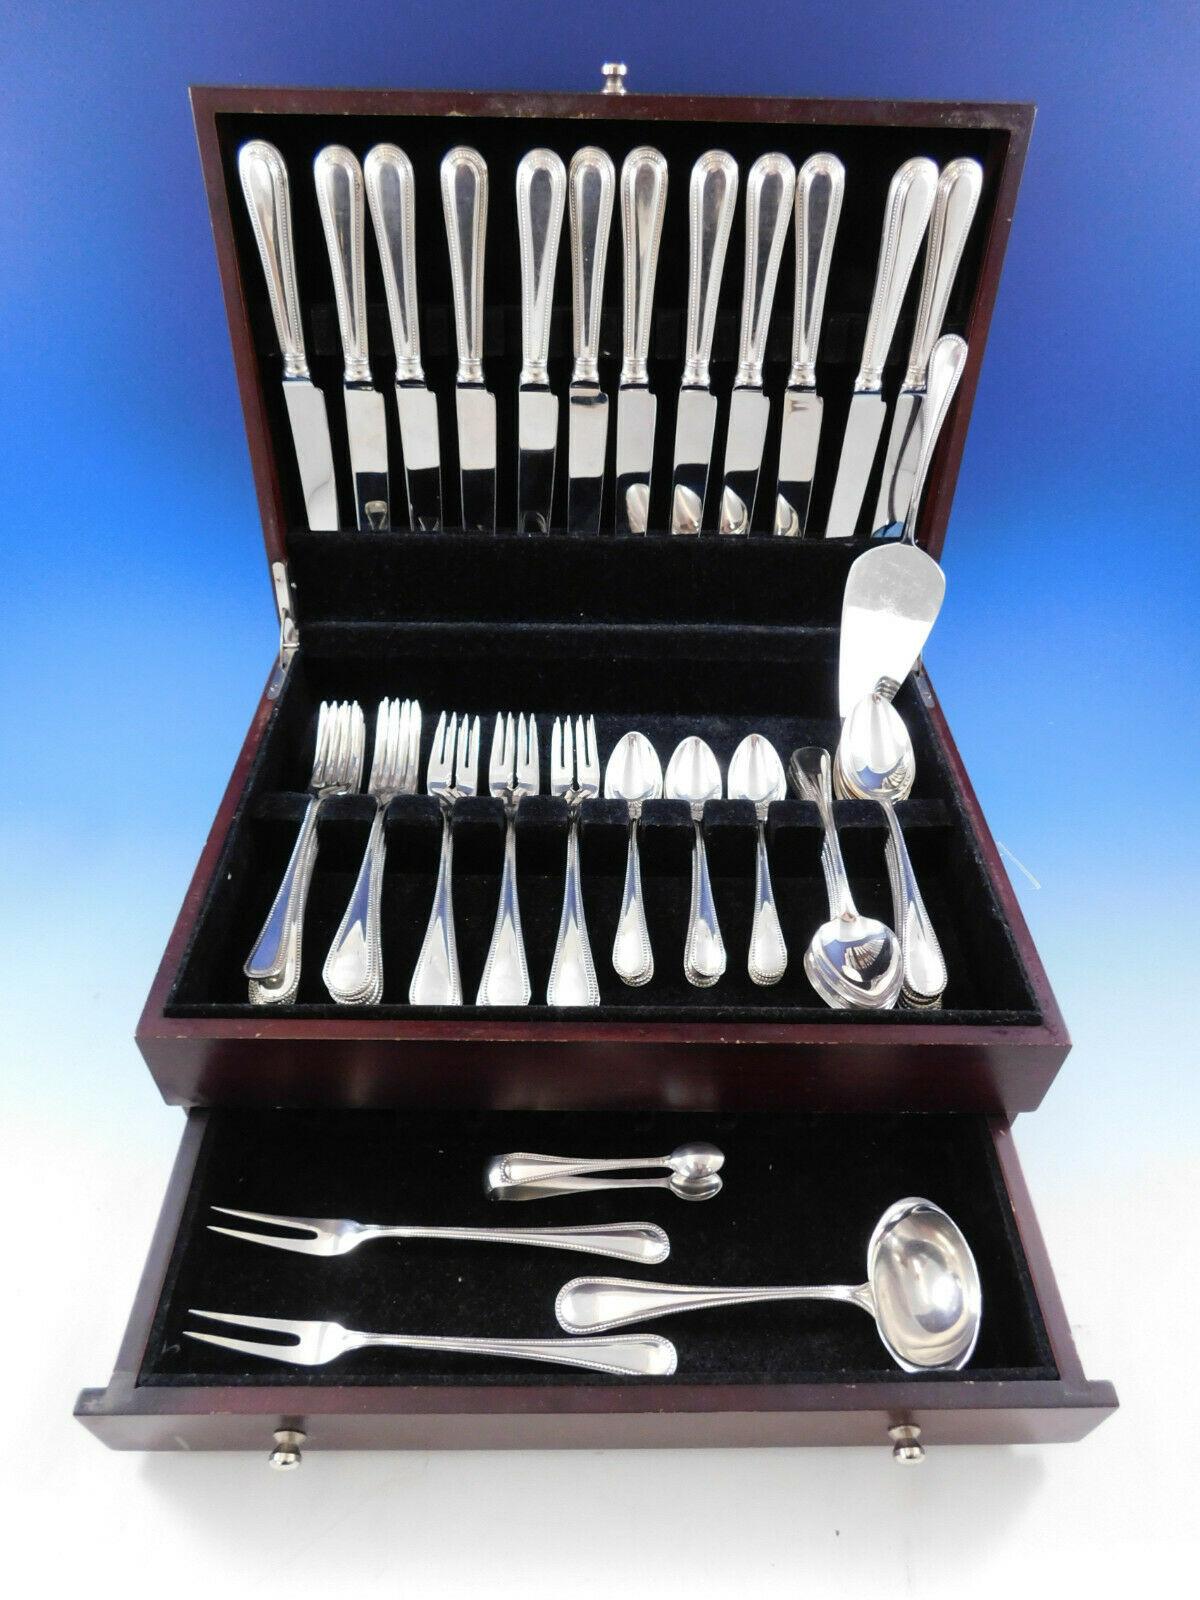 Perles German 800 silver set with timeless beaded design - 71 pieces total (13 pieces are complimenting Bead-Round by Carrs pattern, as noted below). This set includes:

12 dinner knives, 9 3/4